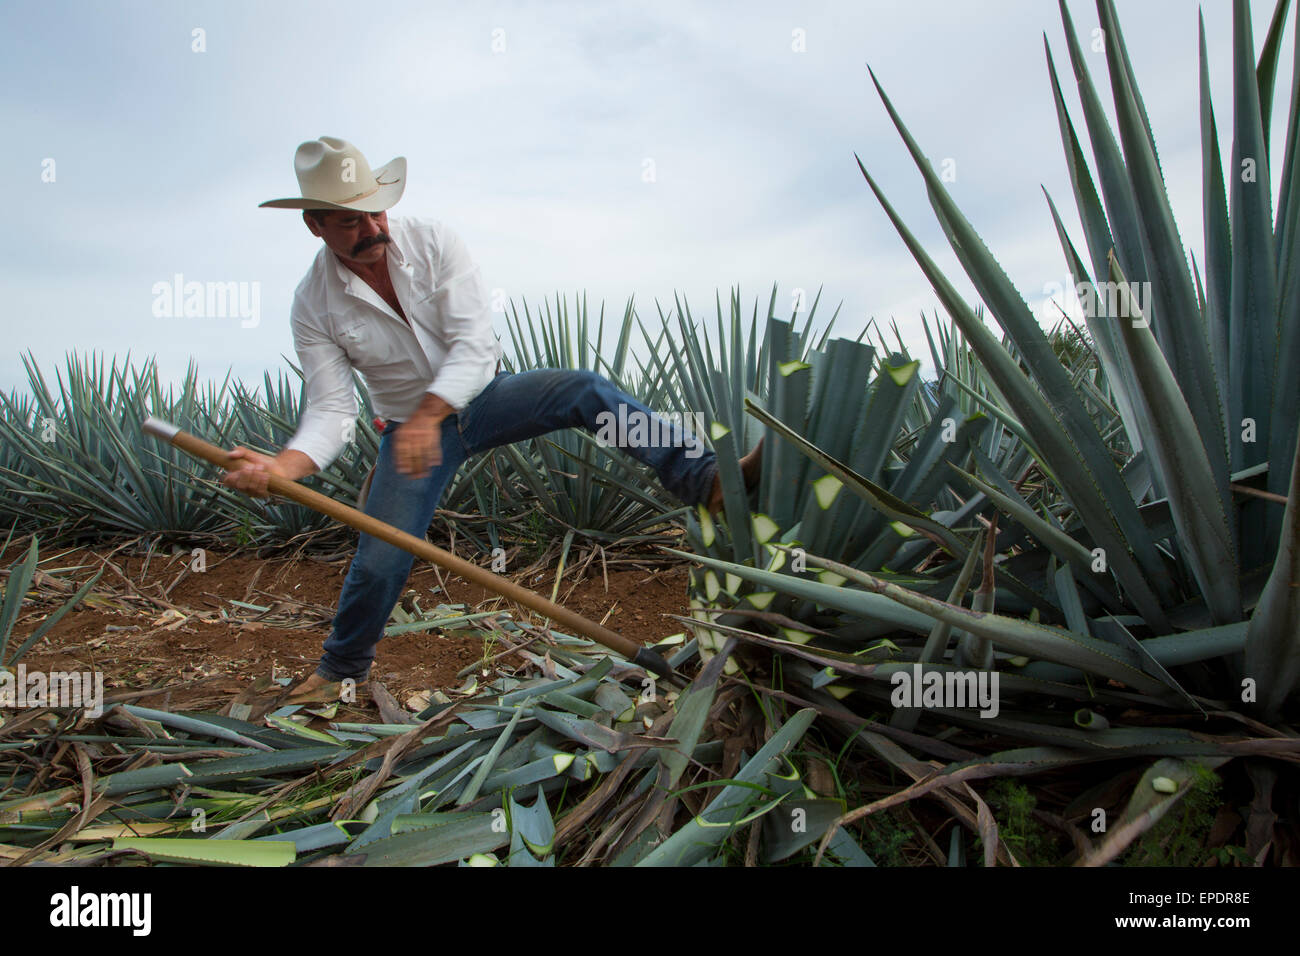 Blue agave, Harvest, Tequila, Jalisco, Mexico Stock Photo